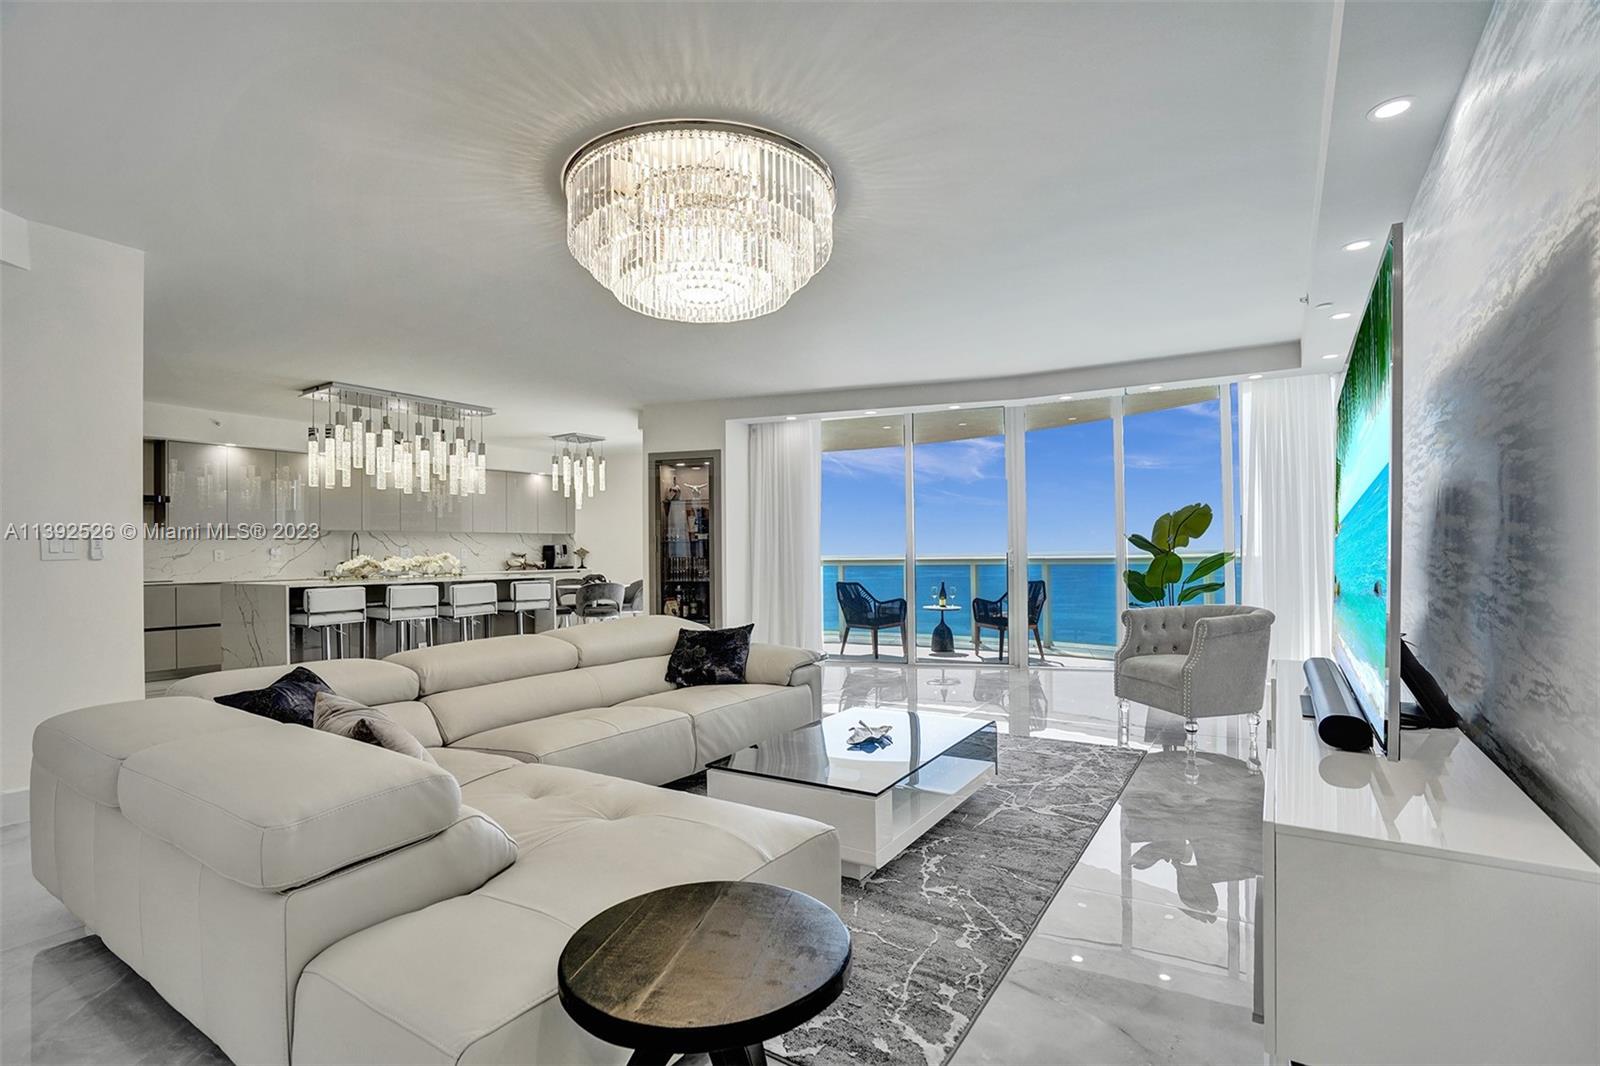 Elegance meets extravagance in this completely reimagined sky high residence! Walk into the new construction type high end finishes and upgrades in the well established Ocean IV landmark building in Sunny Isles. Take pleasure in watching sunrises and sunsets from the multiple terraces or the luxury of the lavish soaking tub. Call this one of a kind absolutely unique condo with over 3000 sq feet of pure luxury your home. Come to see it to fully appreciate the extent of the effort put forth. Inquire about the option of purchasing fully furnished.